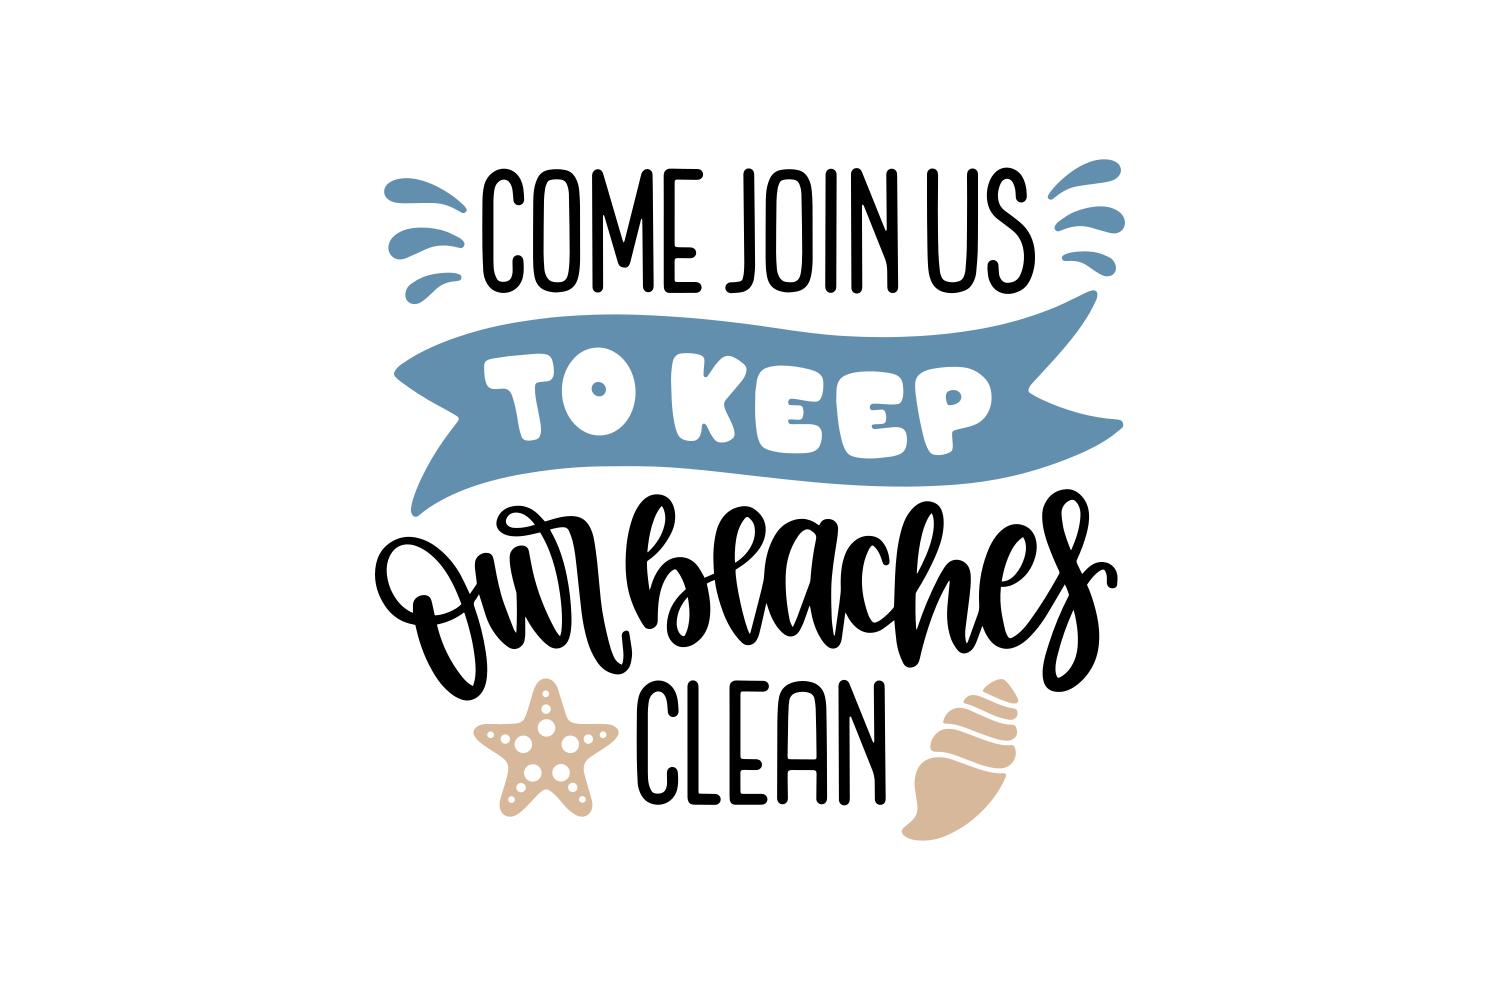 Come Join Us to Keep Our Beaches Clean